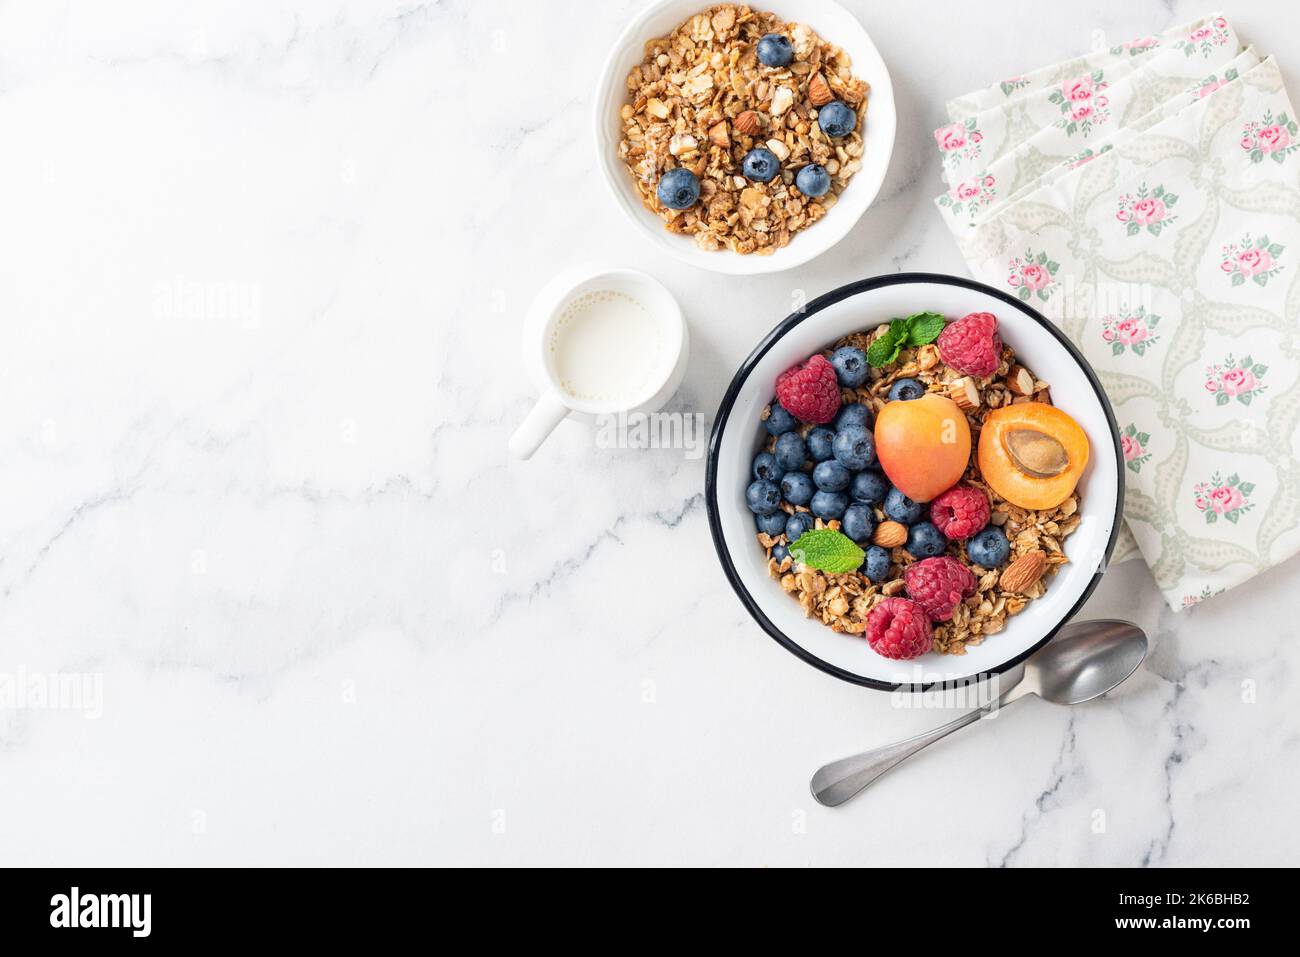 Crunchy Granola With Fresh Berries And Apricots In Bowl On White Marble Background, Top View Copy Space Stock Photo